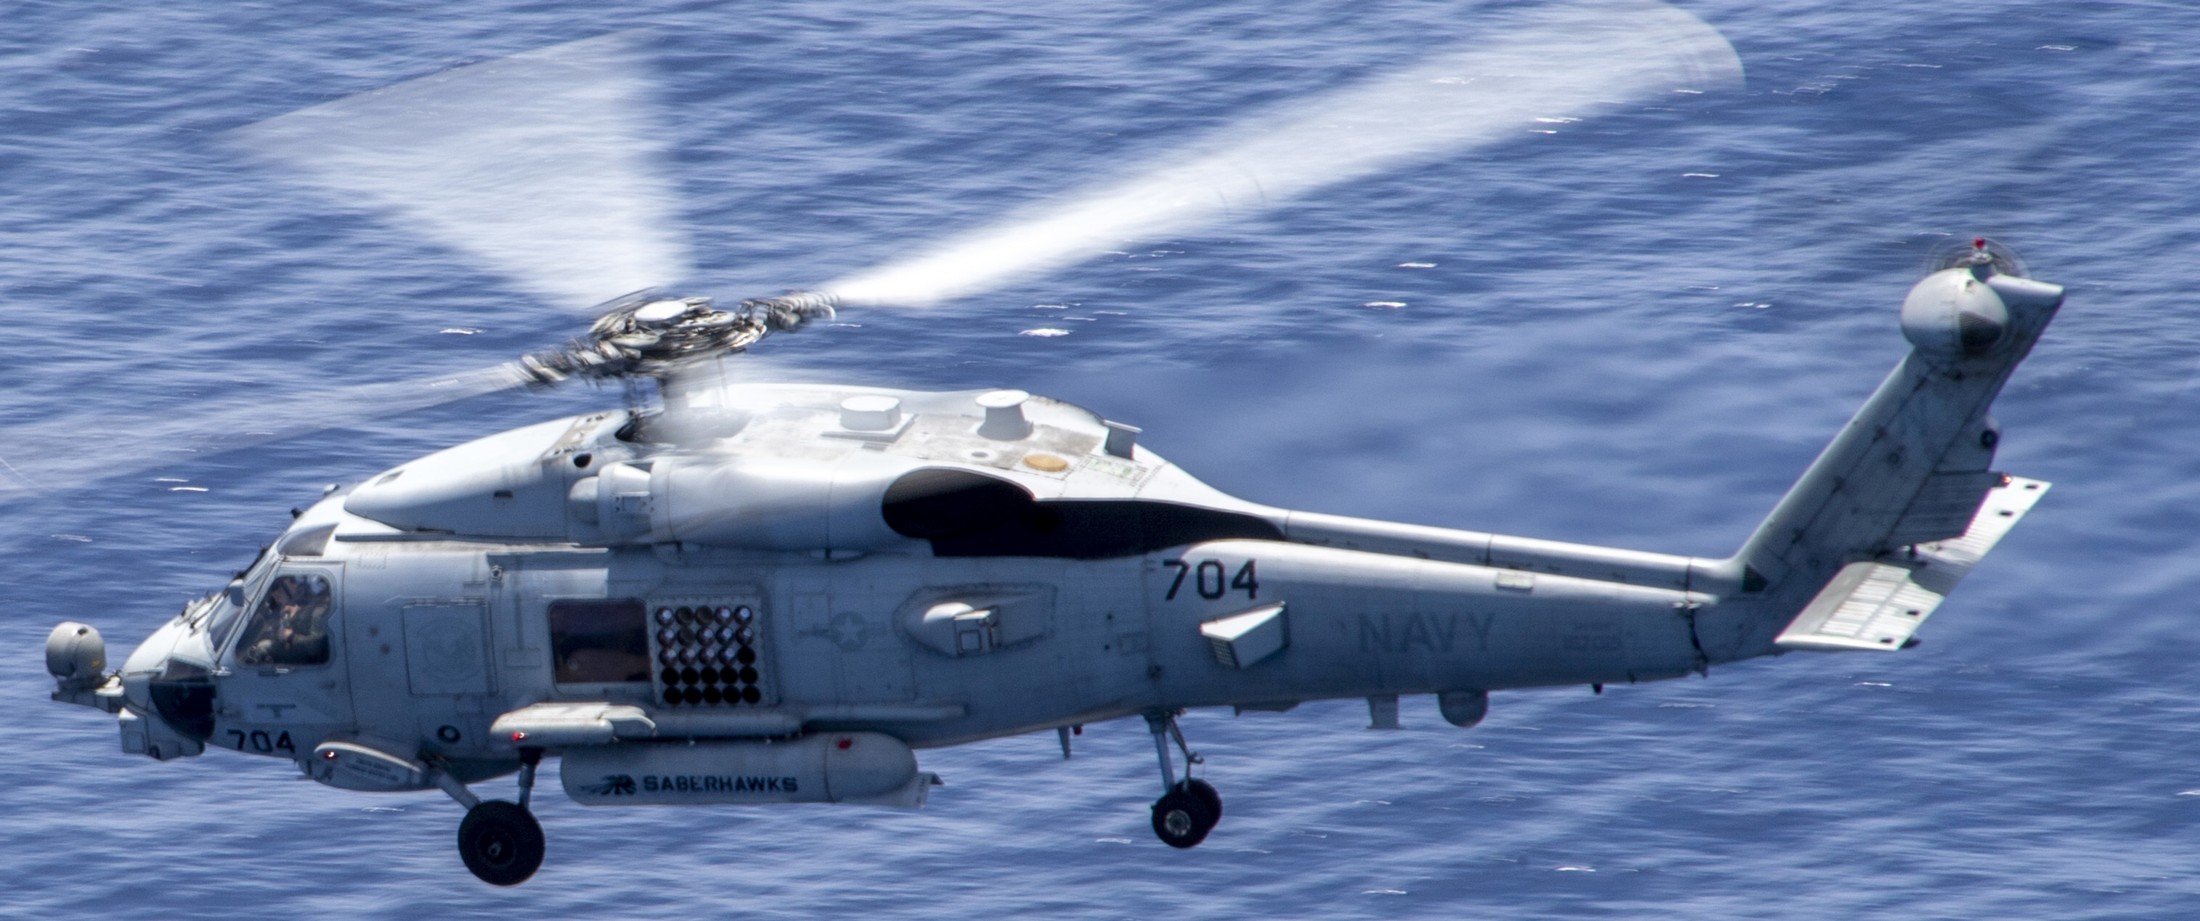 hsm-77 saberhawks helicopter maritime strike squadron mh-60r seahawk 75